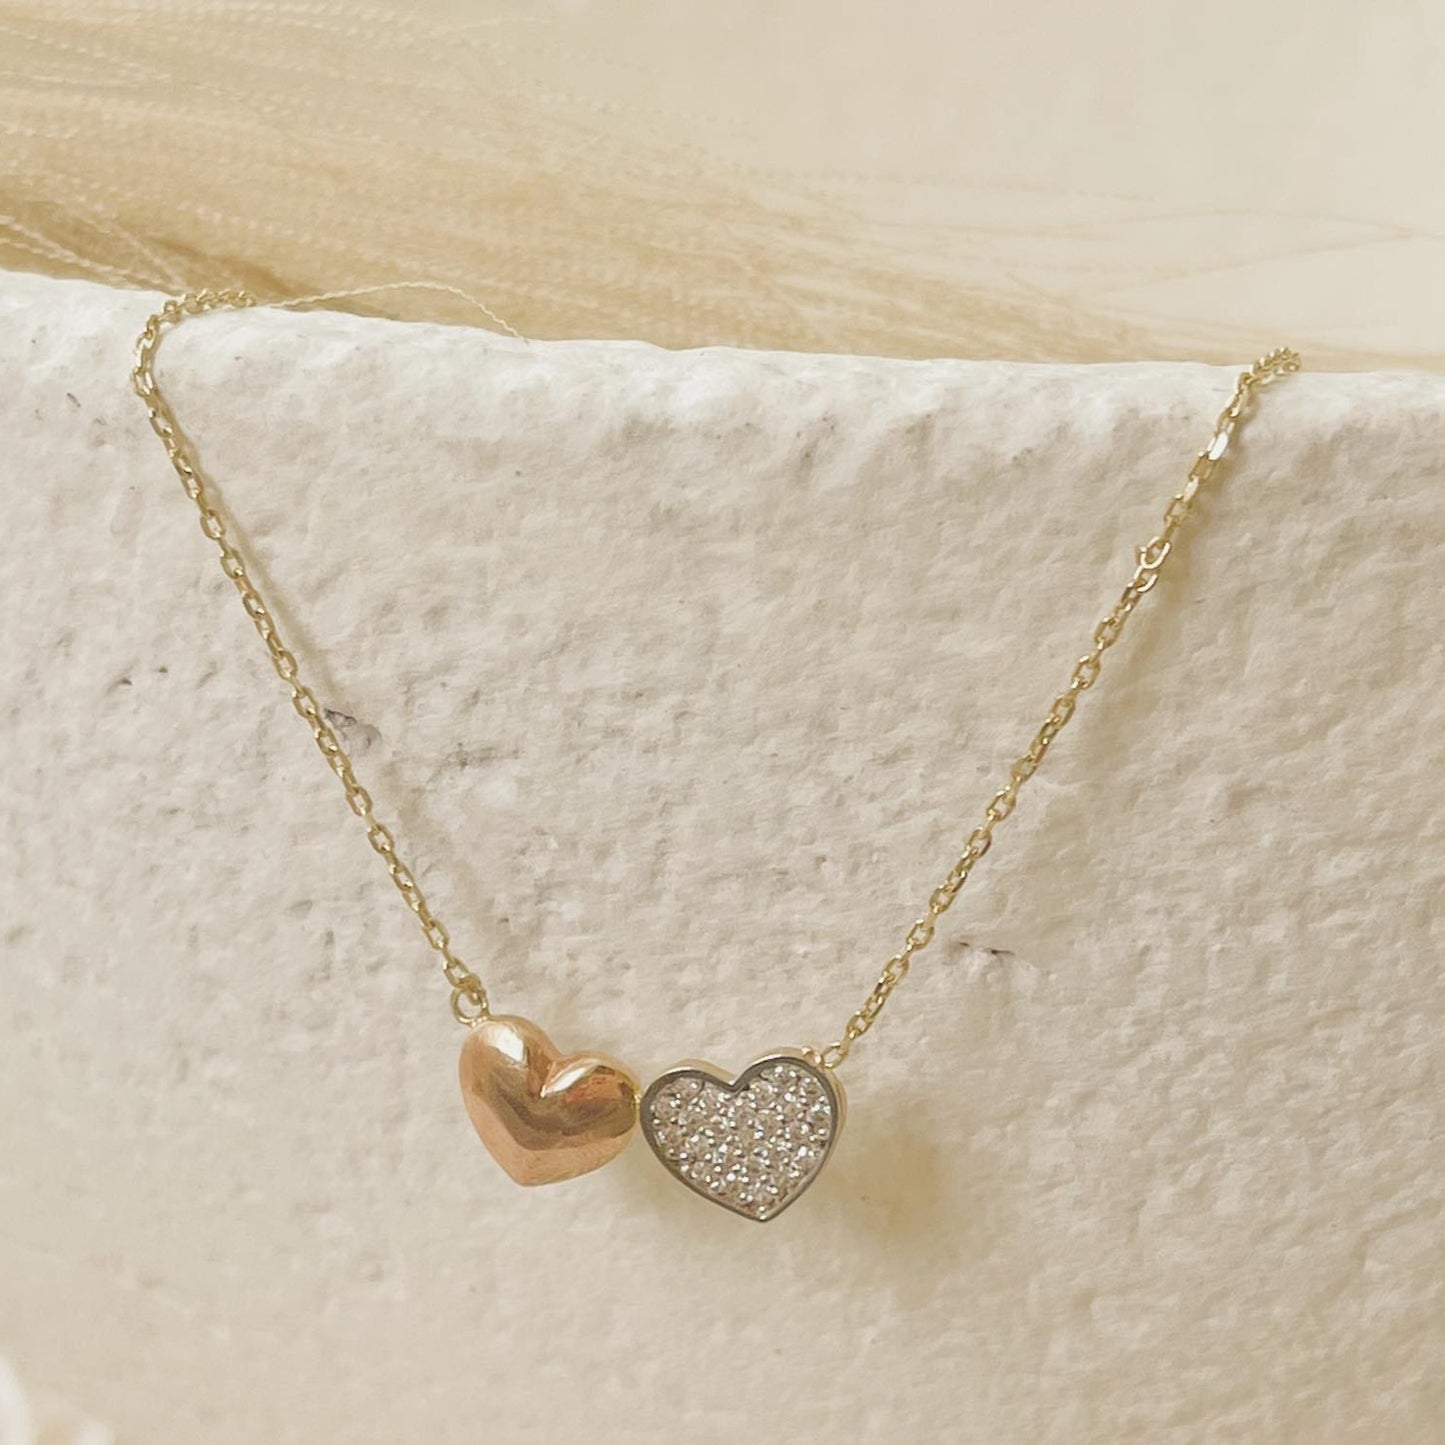 Load image into Gallery viewer, This is a double heart 10K gold pendant necklace. It is simple and delicate enough to add some charm and bling to any outfit. This love necklace can be used as a gift to your special one or just wear it on your special days.
